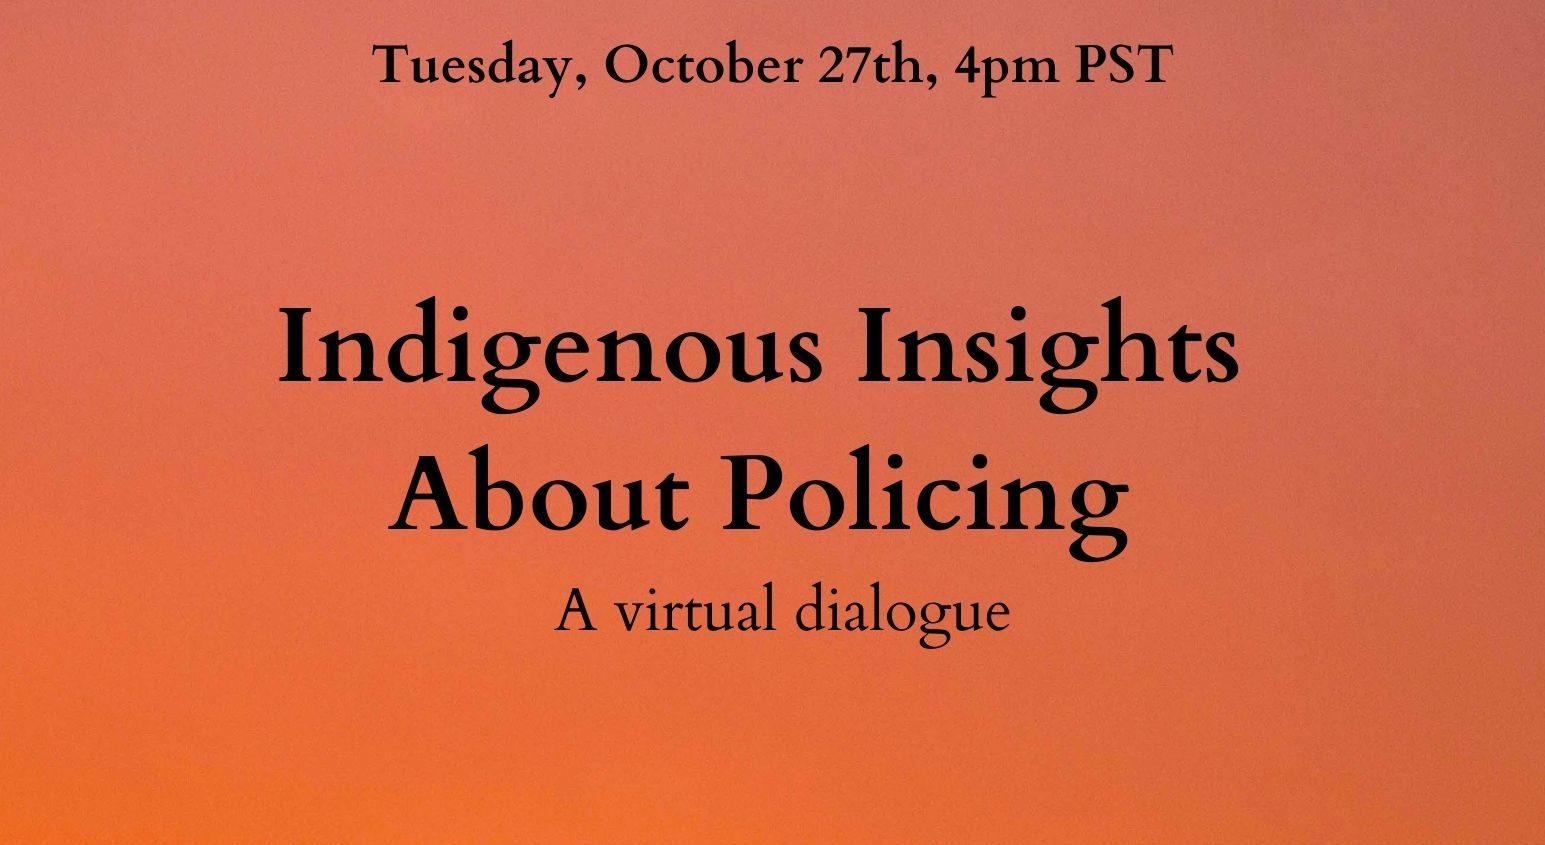 Flyer for Indigenous Insights about Policing event on October 27th at 4pm. Photo background features an orange and pink sunset sky over the silhouette of an urban/industrial skyline